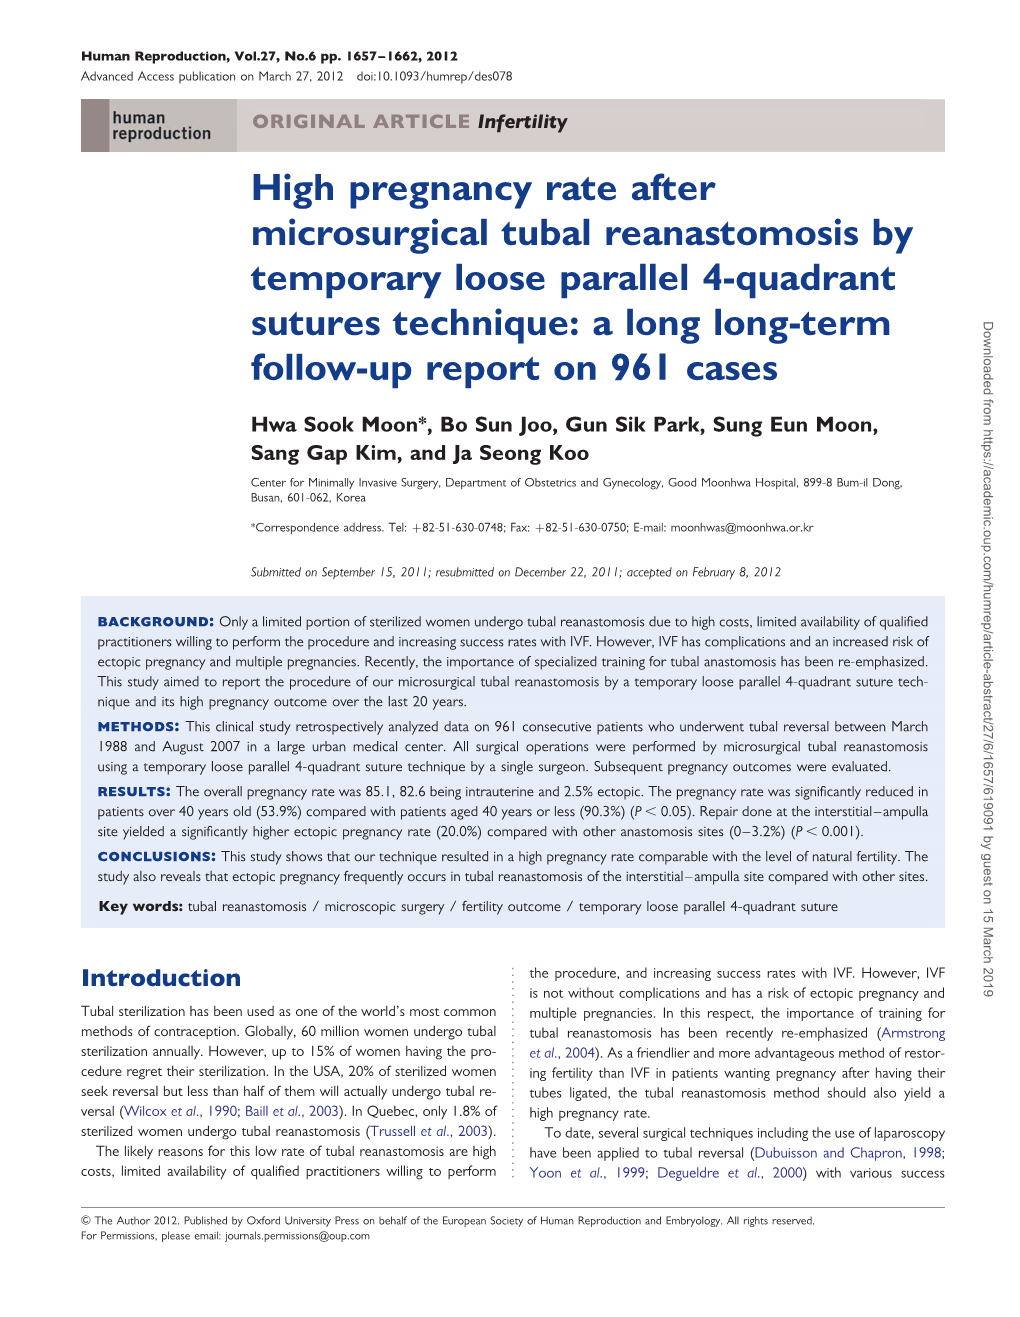 High Pregnancy Rate After Microsurgical Tubal Reanastomosis by Temporary Loose Parallel 4-Quadrant